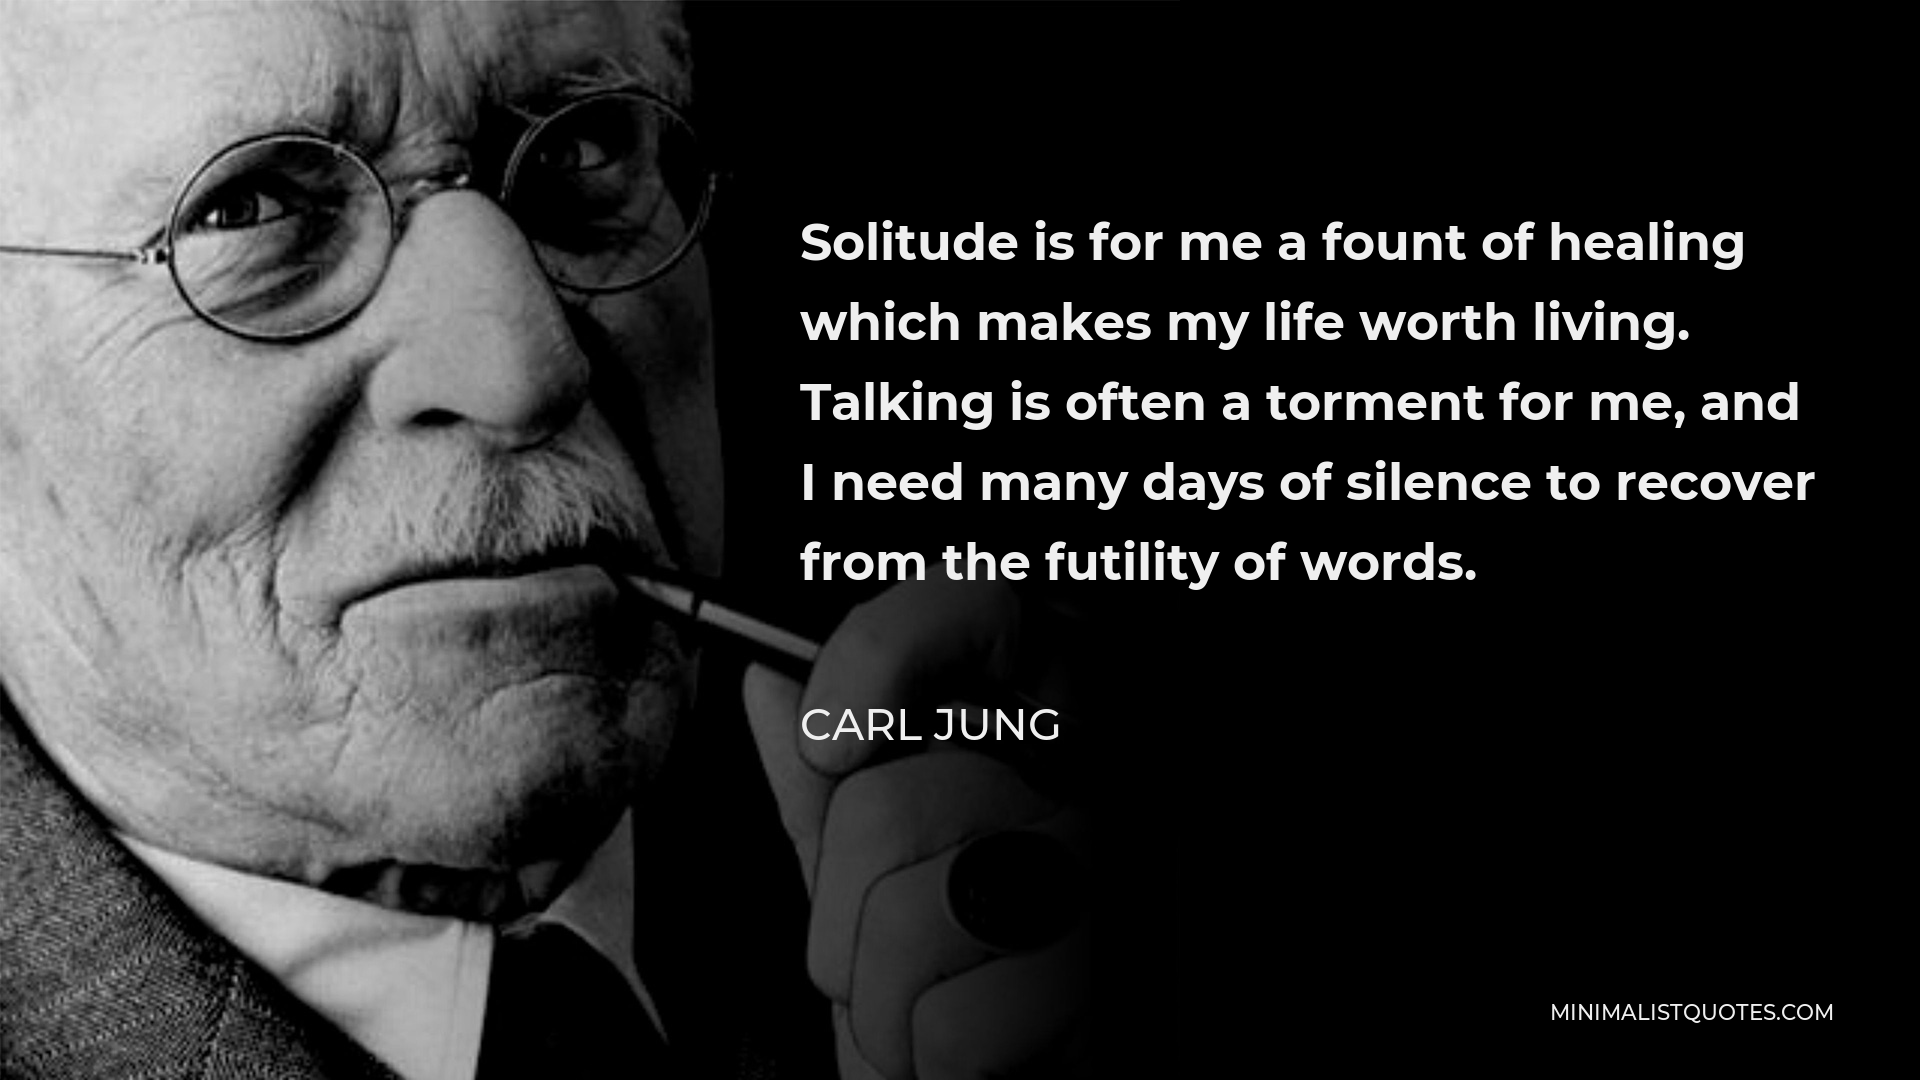 Carl Jung Quote - Solitude is for me a fount of healing which makes my life worth living. Talking is often a torment for me, and I need many days of silence to recover from the futility of words.